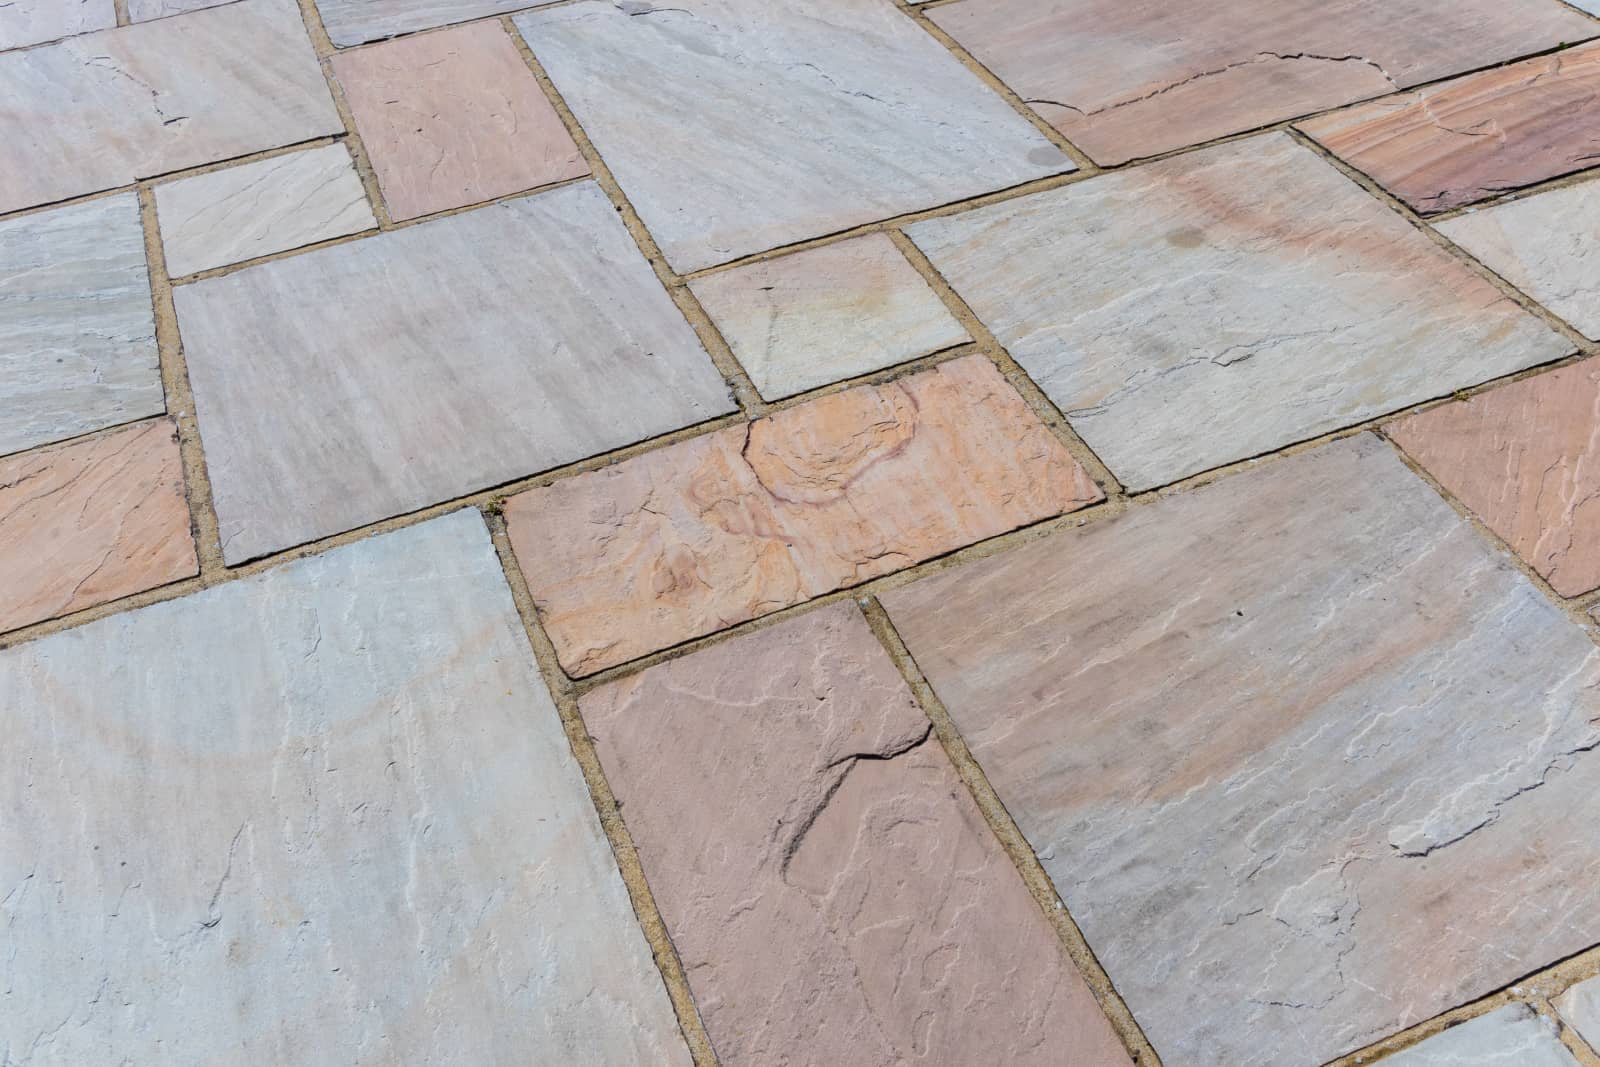 Abstract texture of red, yellow and grey toned Indian sandstone paving